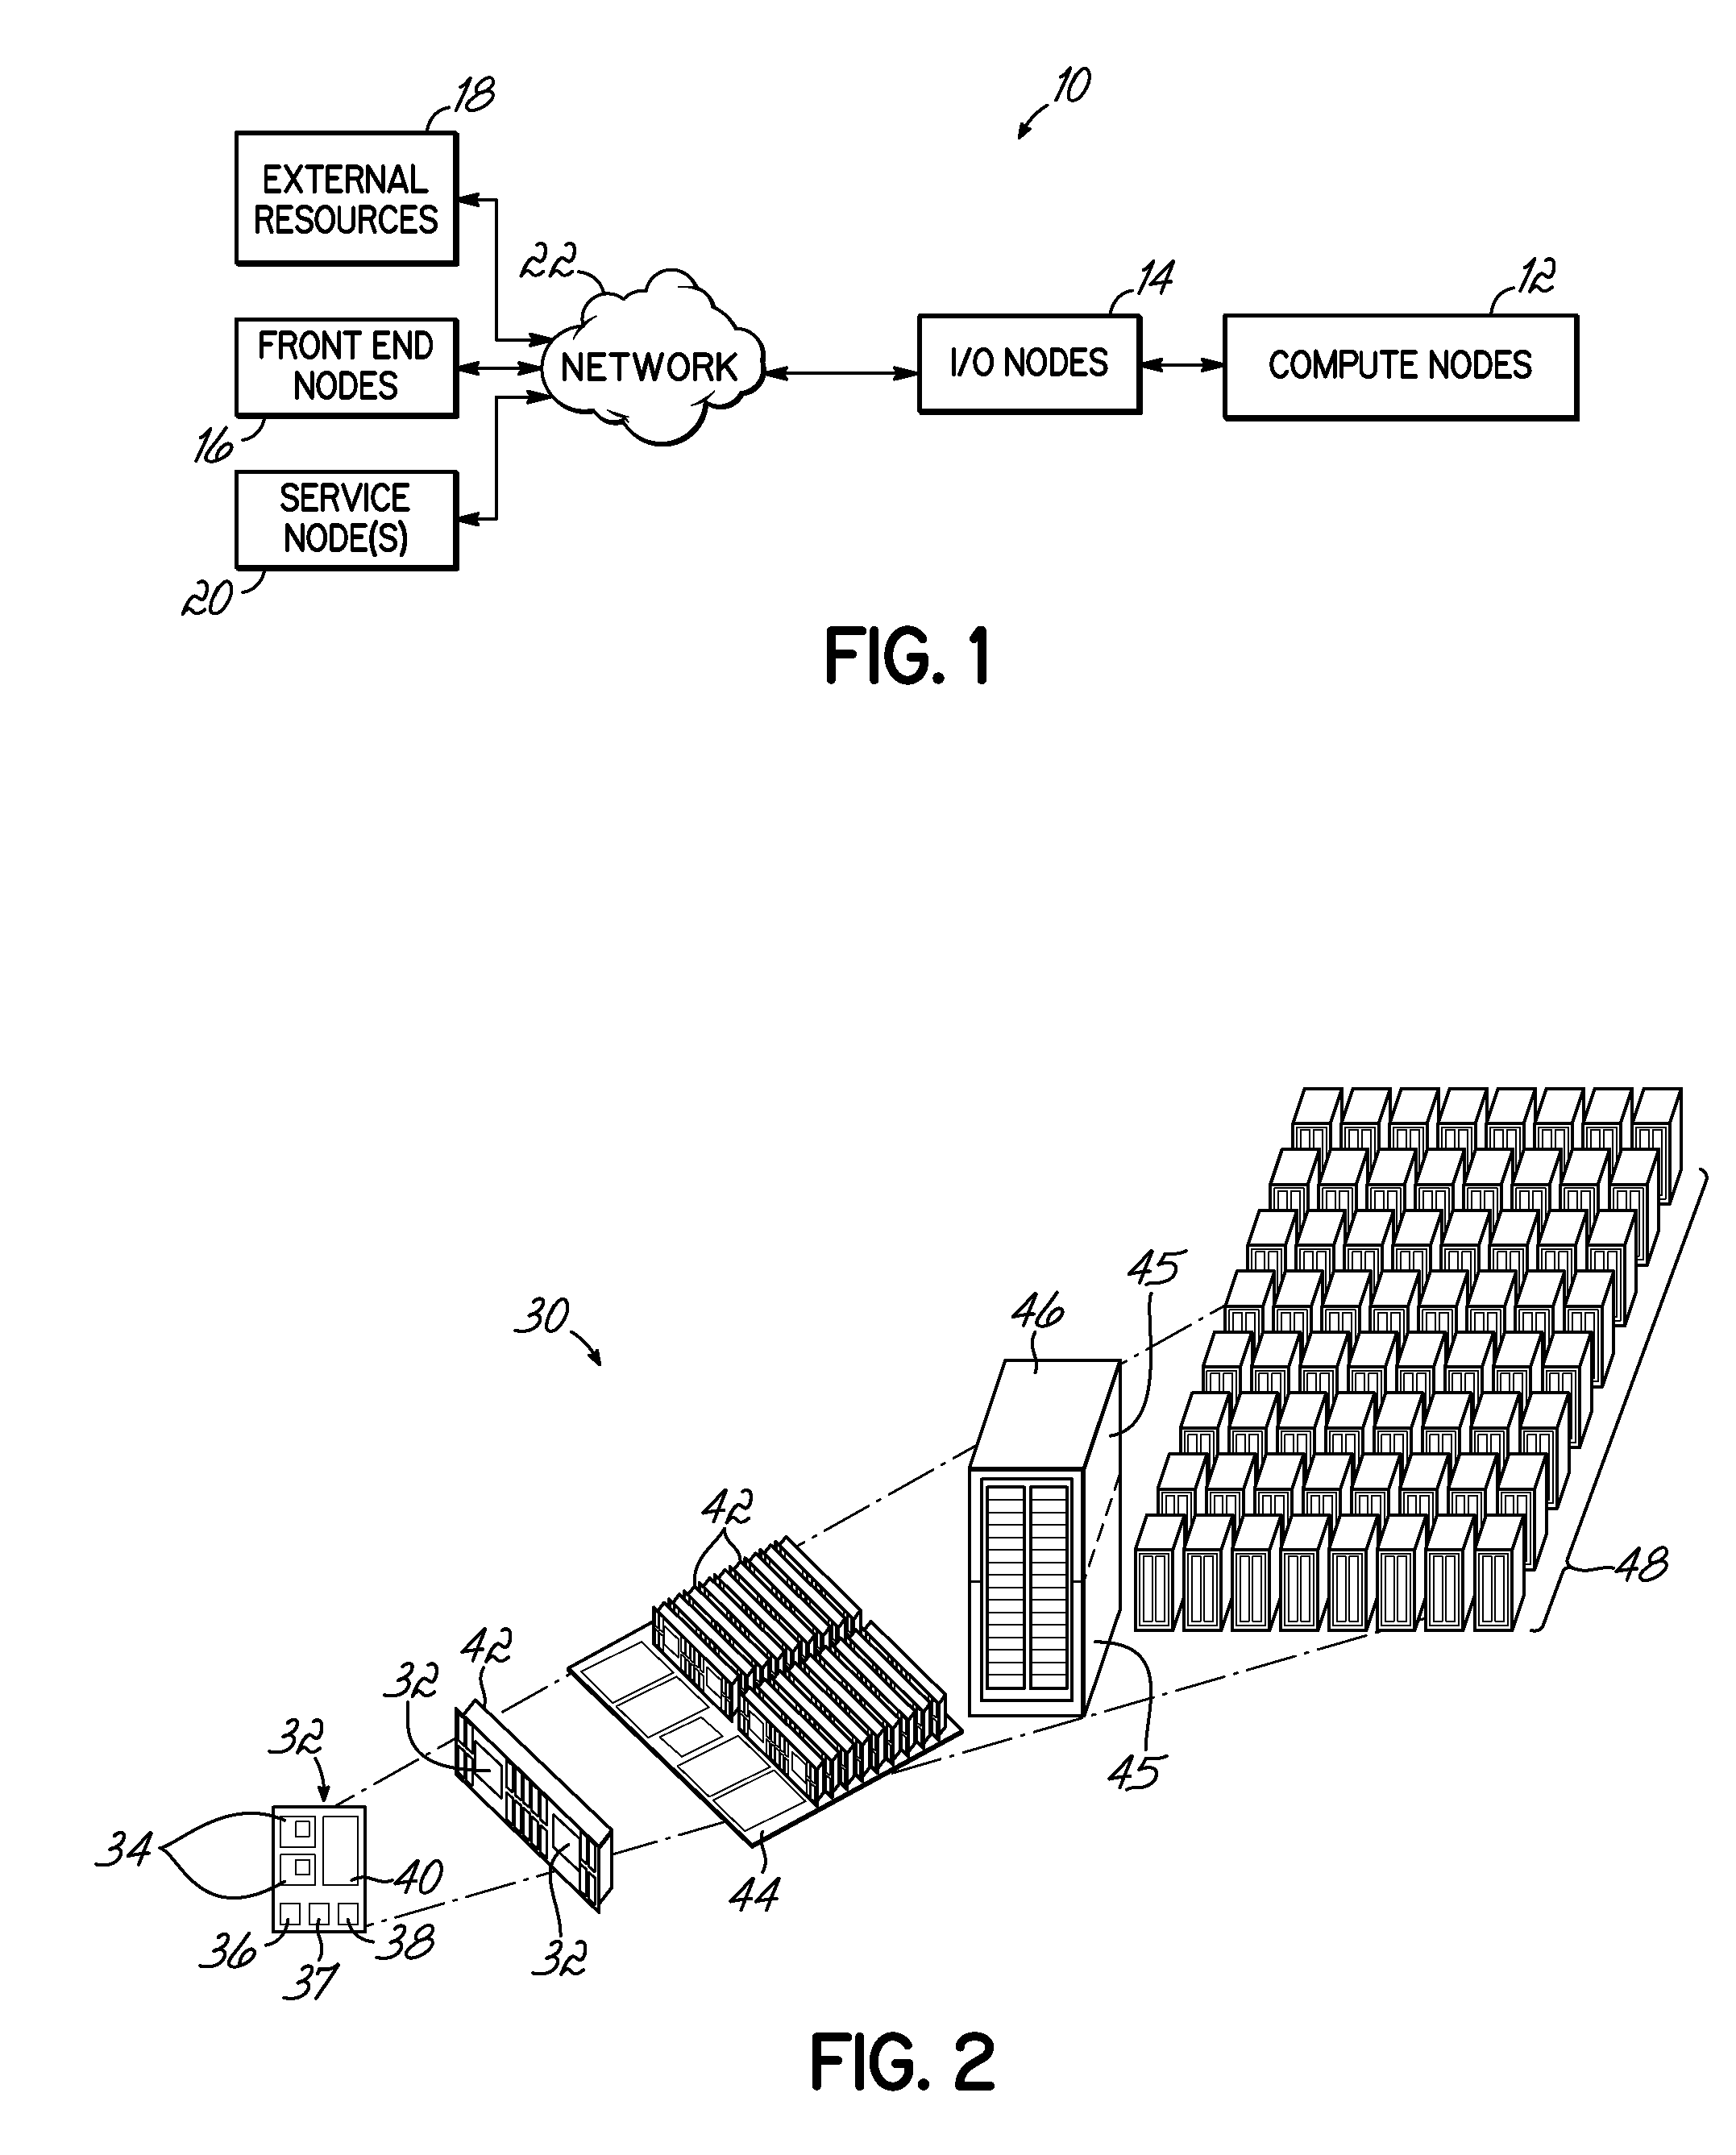 Environment based node selection for work scheduling in a parallel computing system